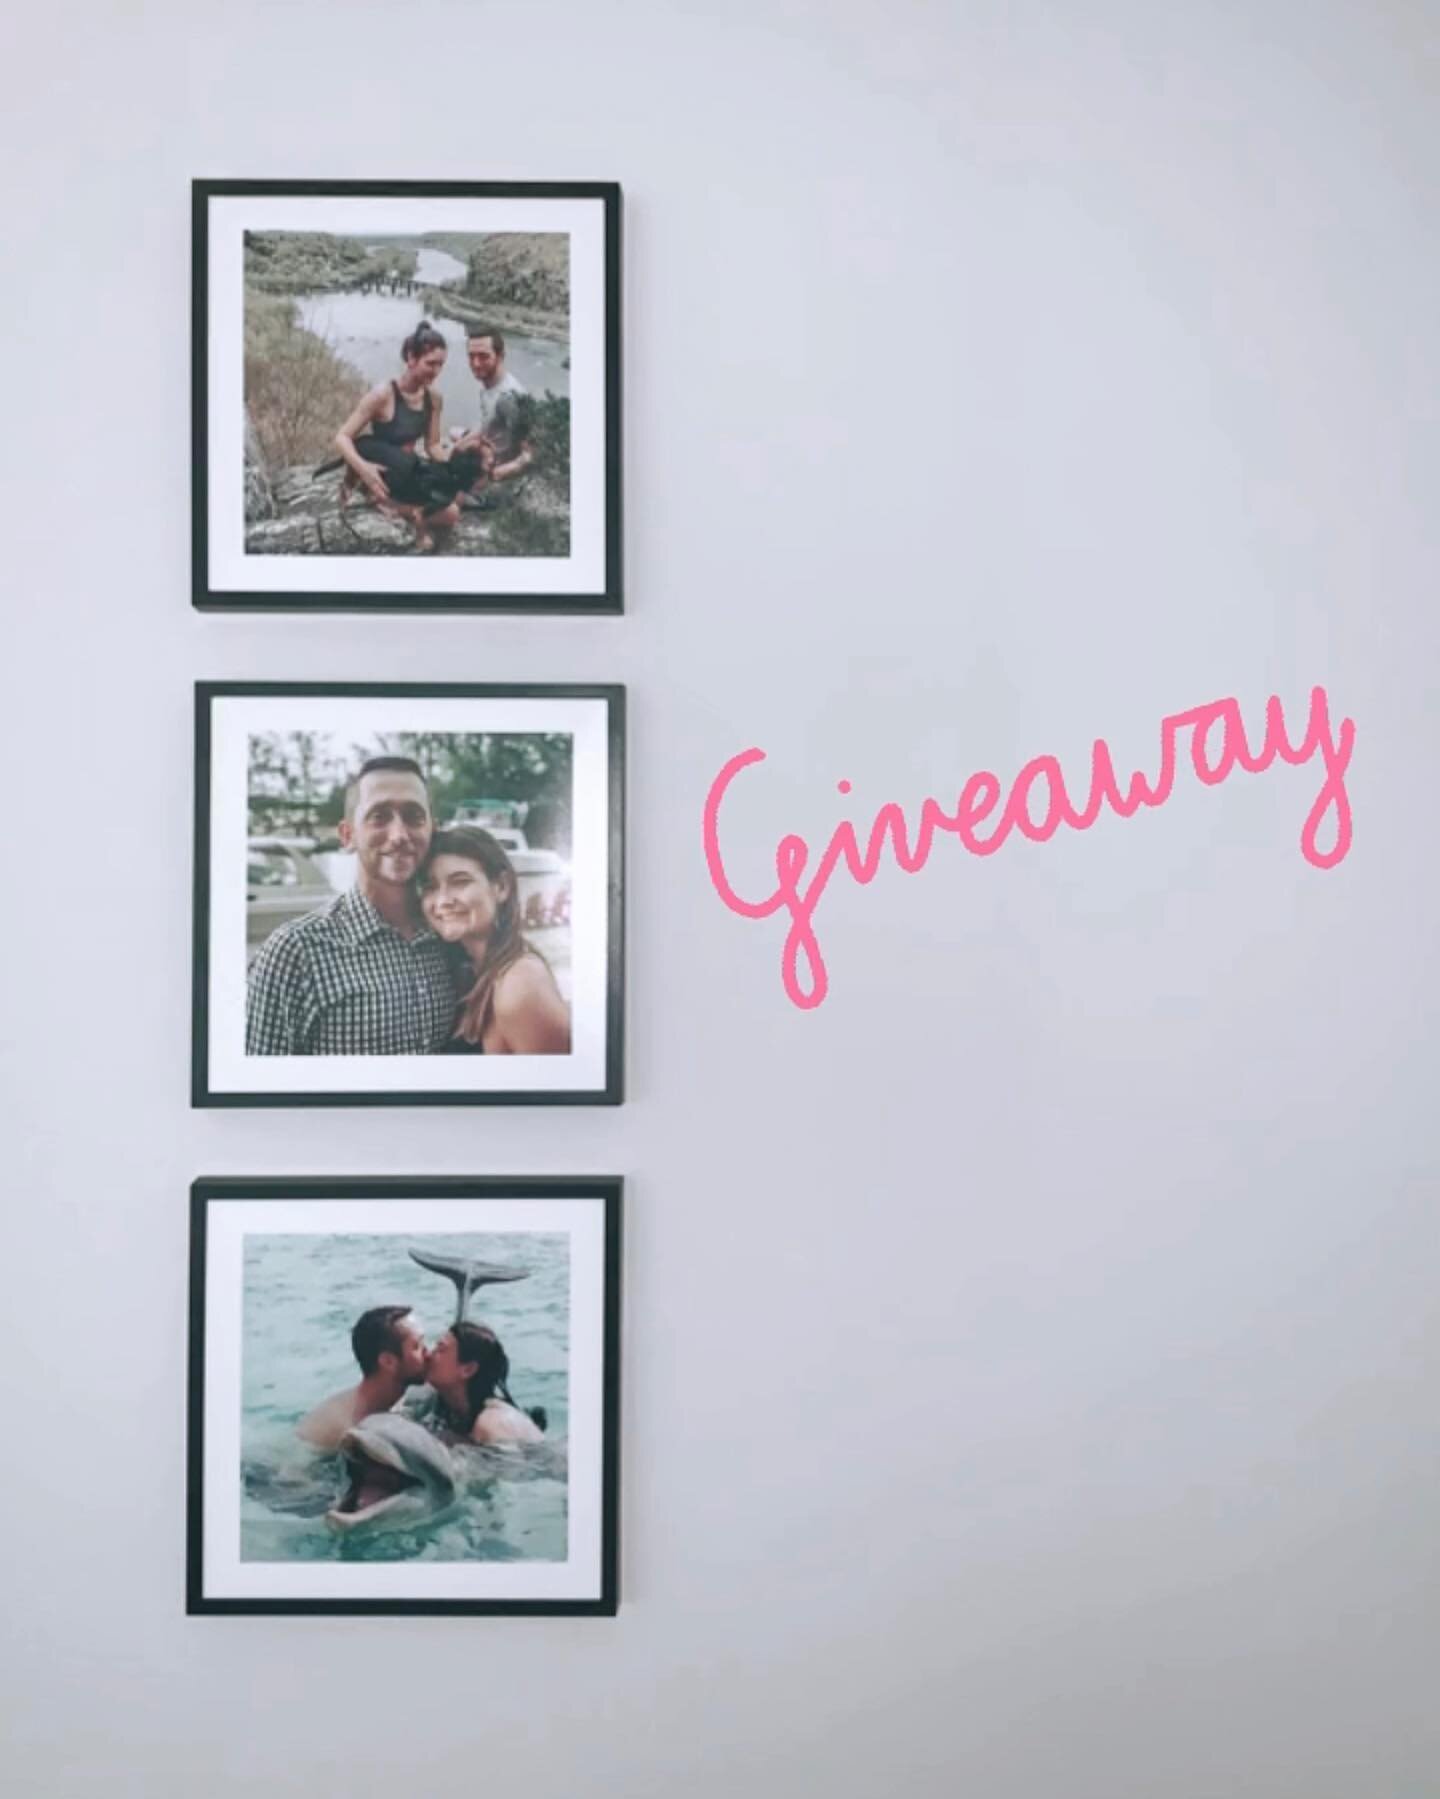 In honor of my favorite month I&rsquo;m giving away a gift card for three custom tiles from @mixtiles to one lucky winner 🎃 ! Mixtiles are AMAZING. They are perfect for getting those engagement, wedding, or family photos up on your wall. Maybe even those adorable photos of your furry friend you&rsquo;ve got on your phone 🐶 

To enter:
1. Make sure you are following @sydneydarwinphotography
2. Like this post
3. Tag three friends (more tags=more entries!)
4. Share this post to your instagram story and tag @sydneydarwinphotography for 3 bonus entries

Winner will be announced Sunday, October 4! ✨